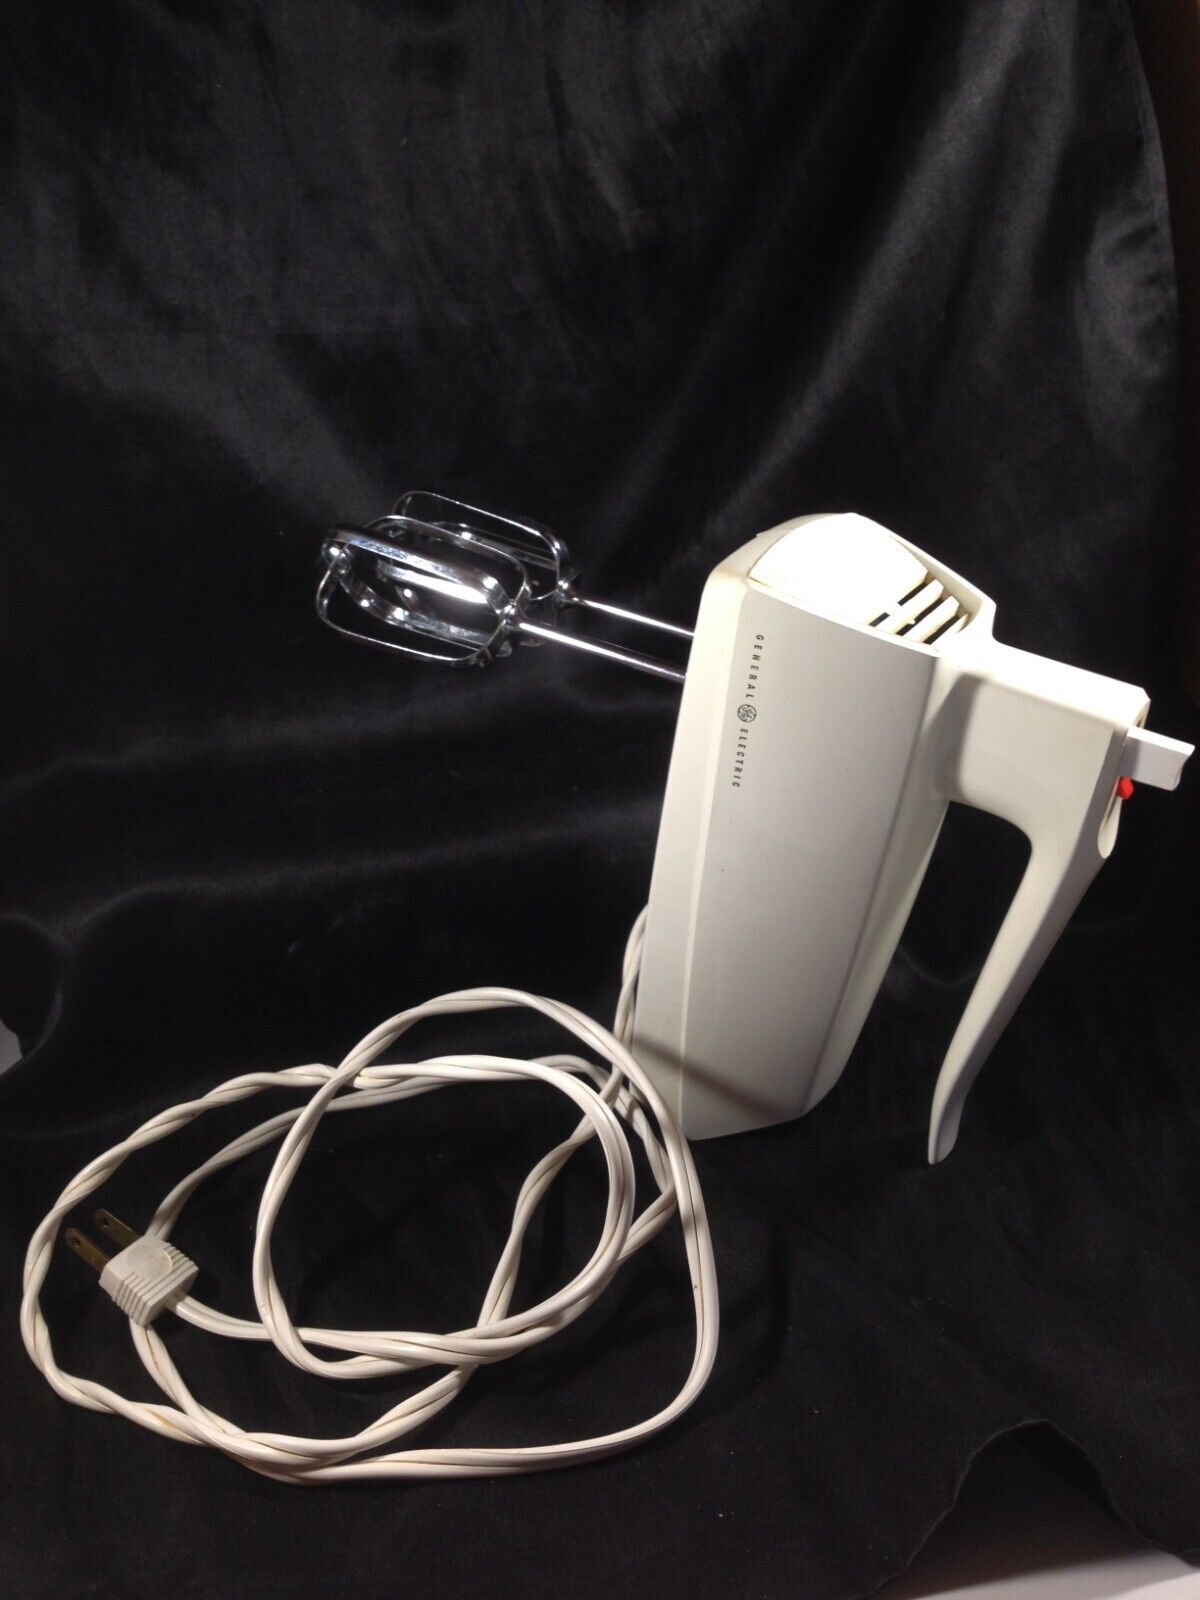 Vintage GE General Electric 3-Speed Portable Hand Mixer 11M57